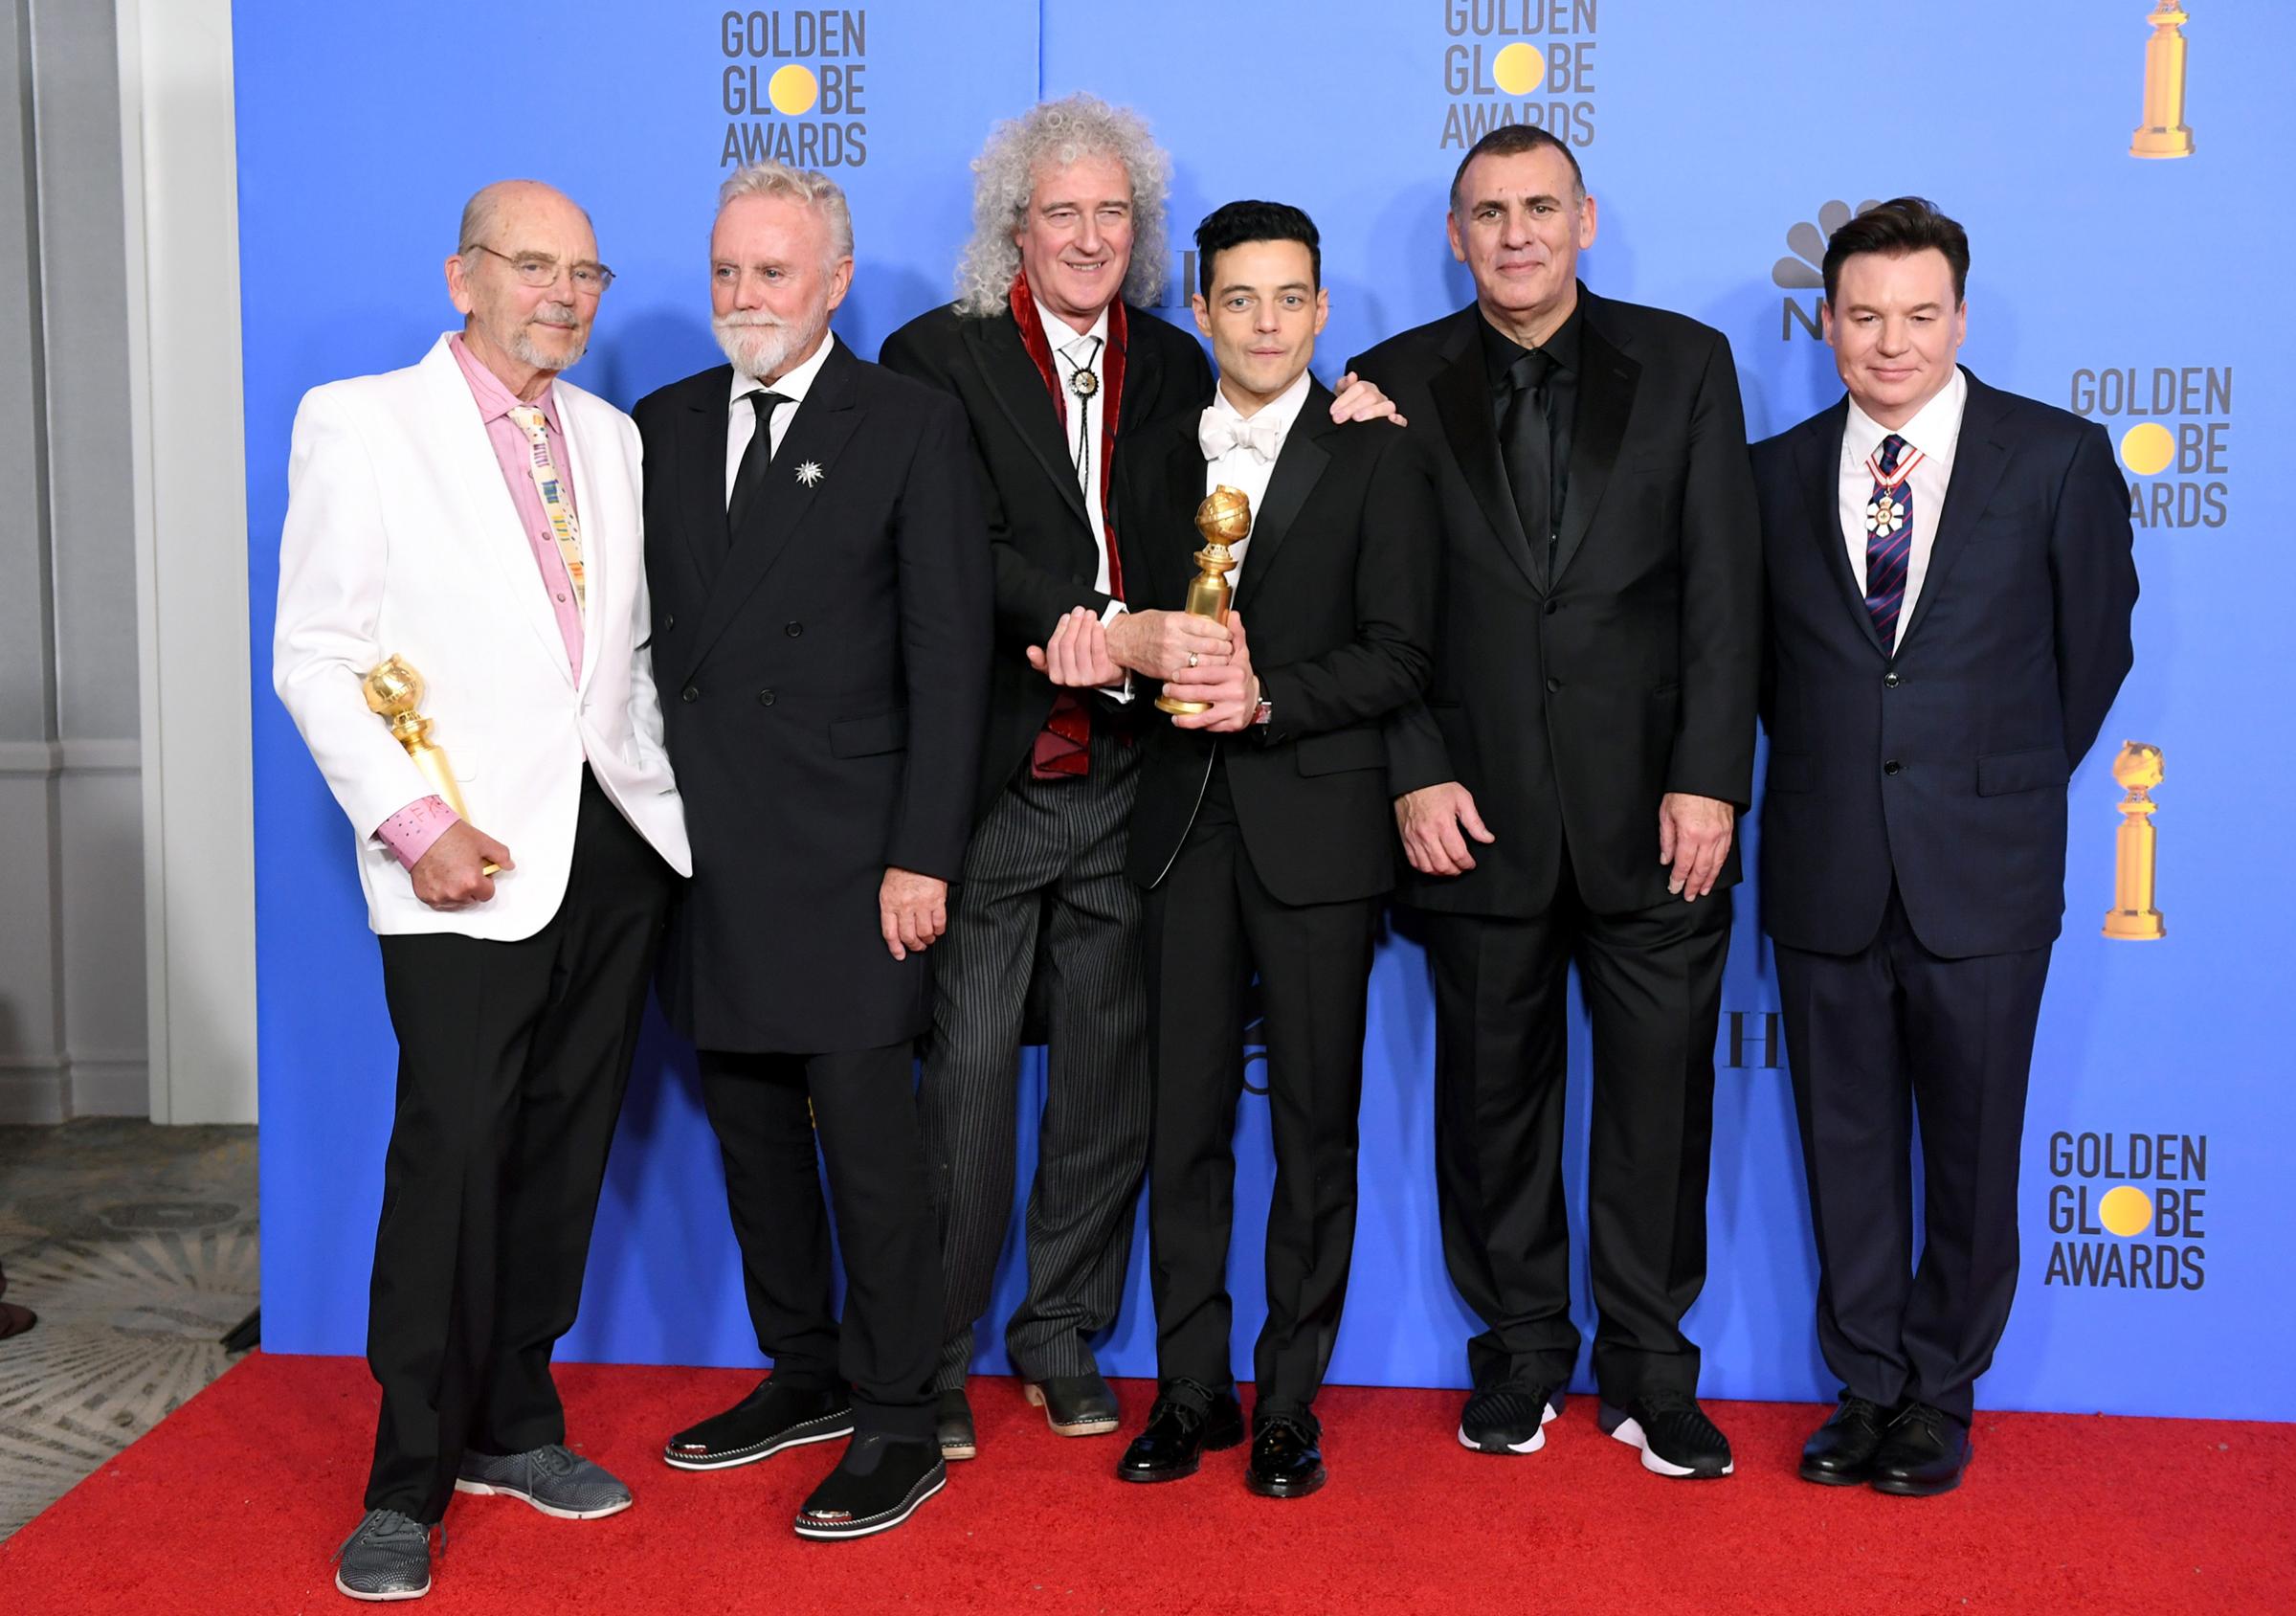 Jim Beach, Roger Taylor and Brian May of Queen, Best Actor in a Motion Picture Drama for 'Bohemian Rhapsody' winner Rami Malek, Producer Graham King, and Mike Myers pose in the press room during the 76th Annual Golden Globe Awards on Jan. 6, 2019 in Beverly Hills.